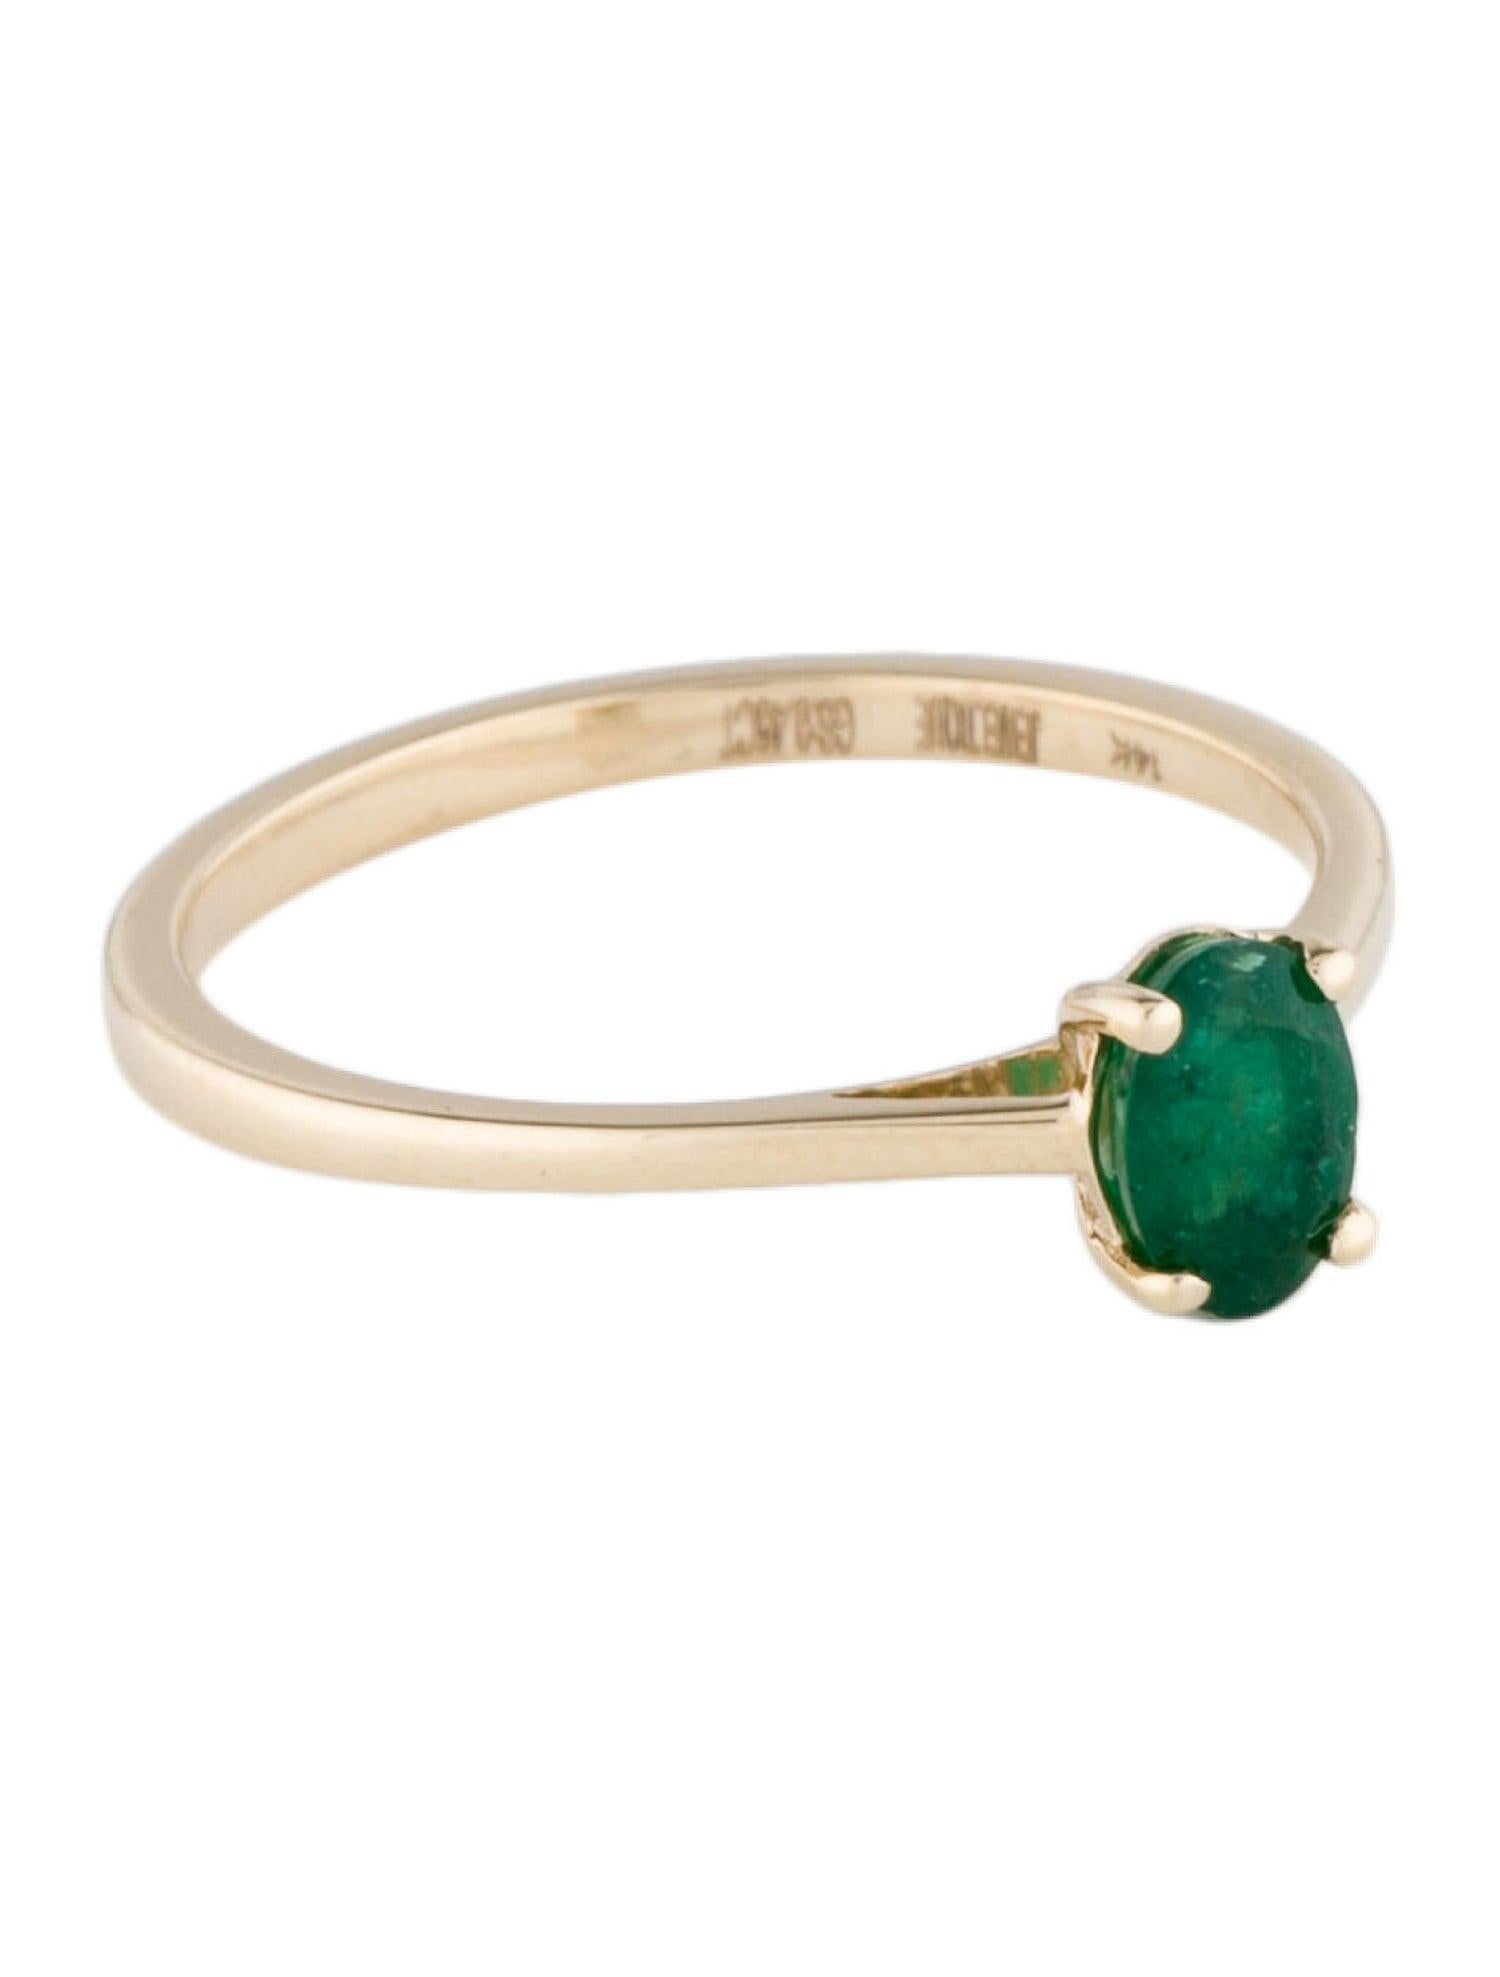 Immerse yourself in the ethereal allure of nature with our Forest Ferns Emerald Ring, a dazzling masterpiece from the renowned Jeweltique brand. Transporting you to the heart of lush forests and verdant landscapes, this exquisite ring captures the